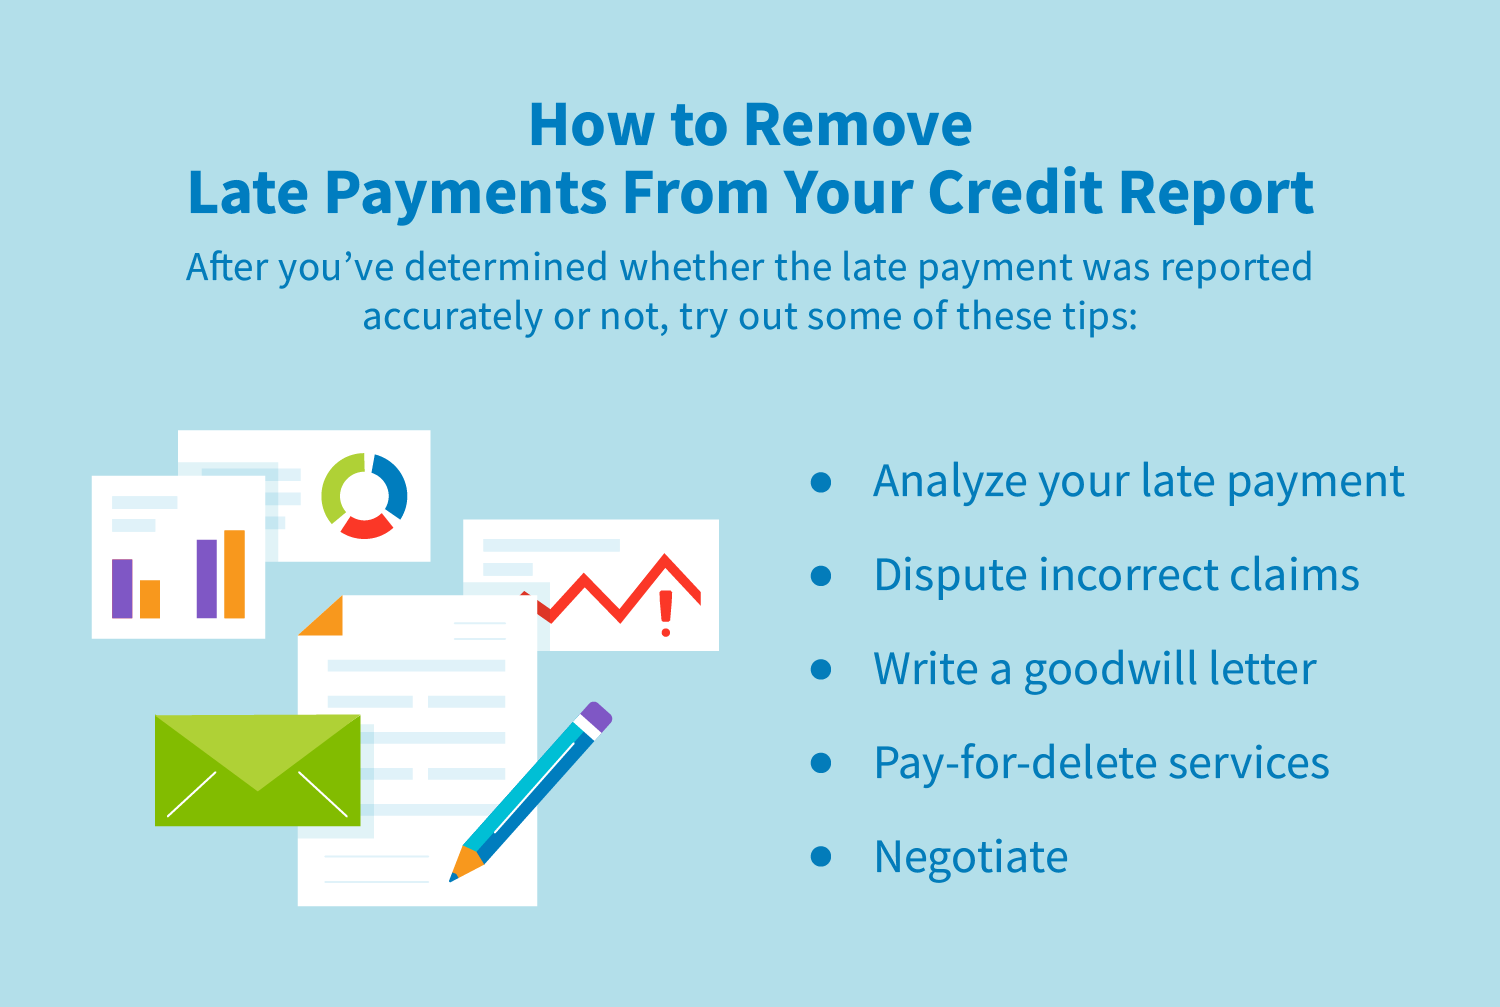 How Do Late Payments Affect My Credit Report?